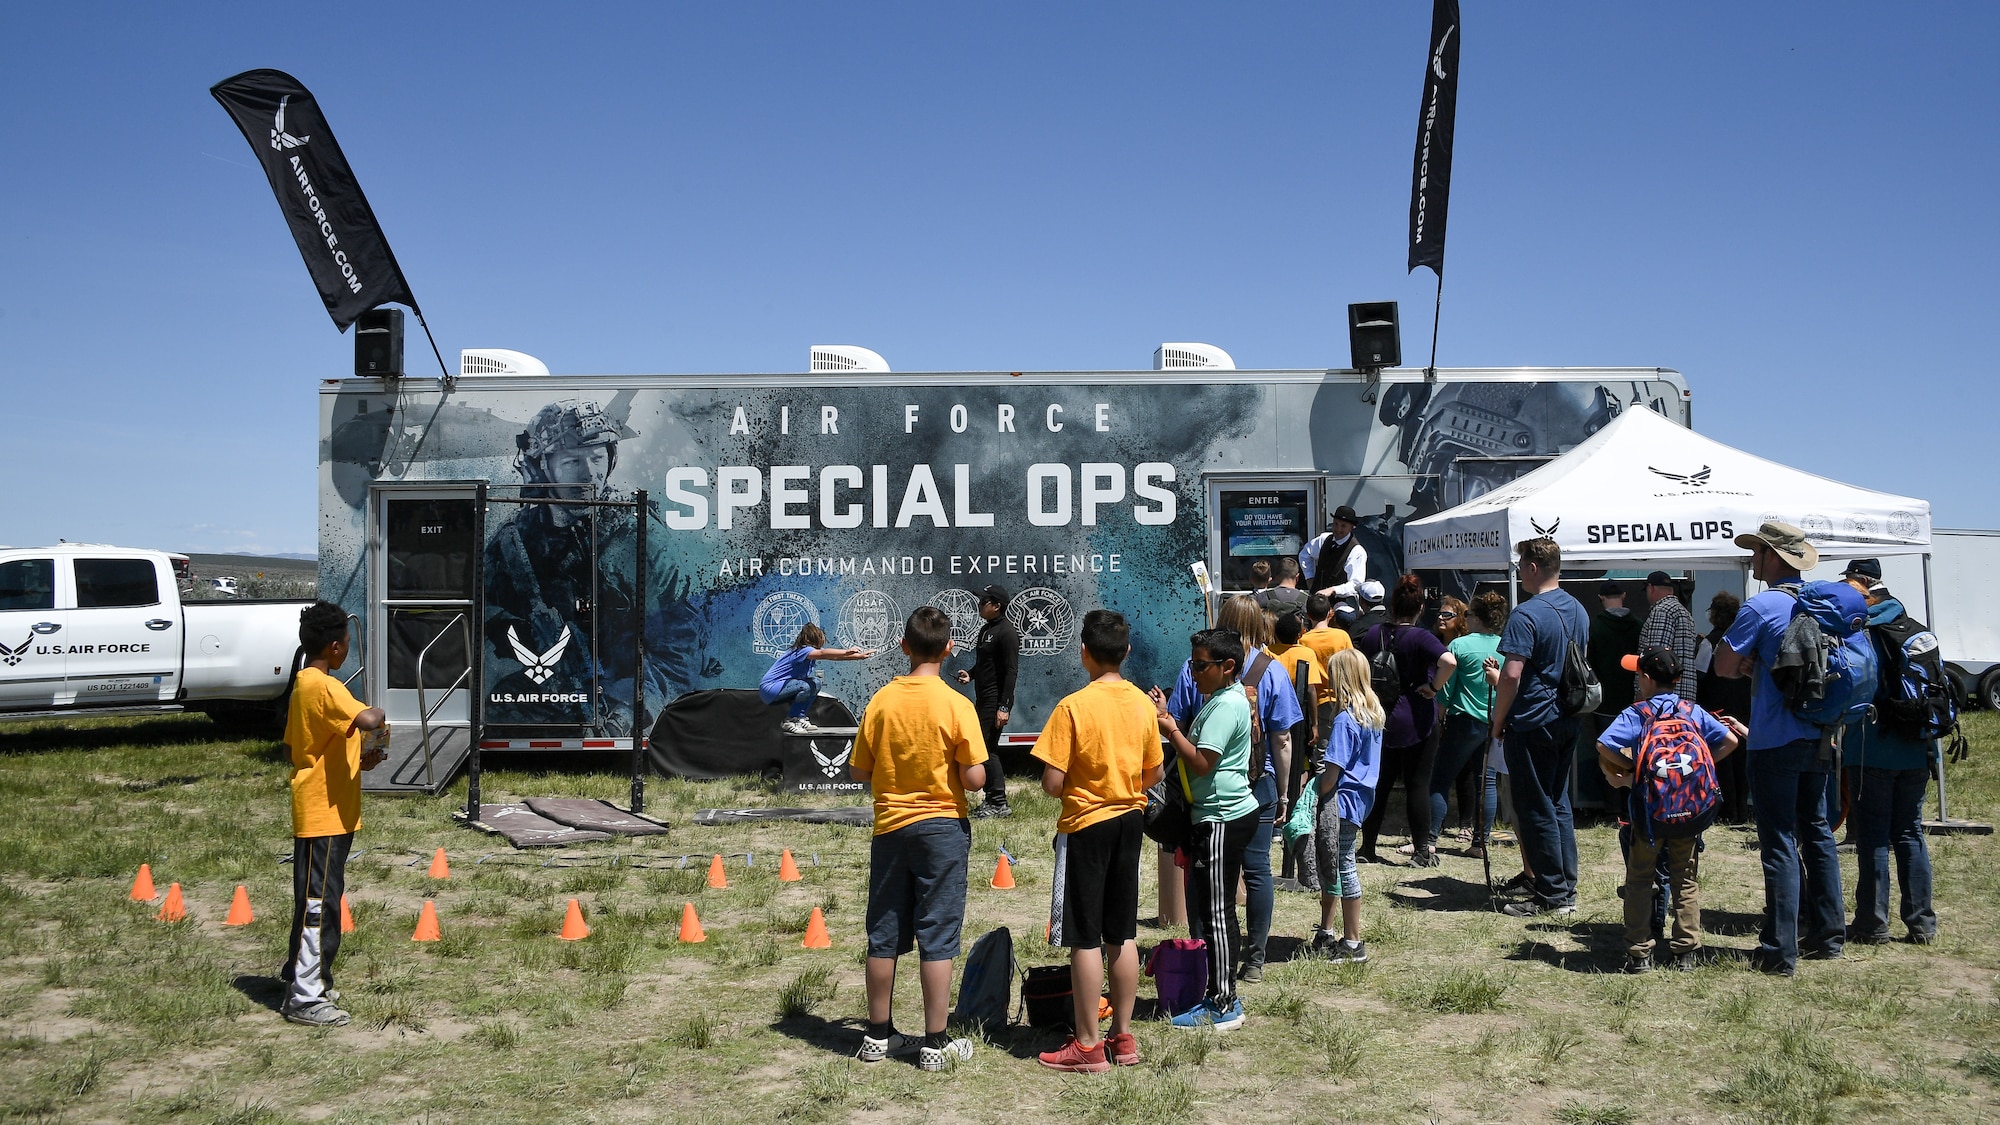 The Air Force Special Ops "Air Commando Experience" exhibit during the Golden Spike Sesquicentennial Celebration May 10, 2019, at Promontory Summit, Utah. The celebration was supported by Air Force Recruiting Service and the Hill Air Force Base STEM Outreach program. (U.S. Air Force photo by R. Nial Bradshaw)